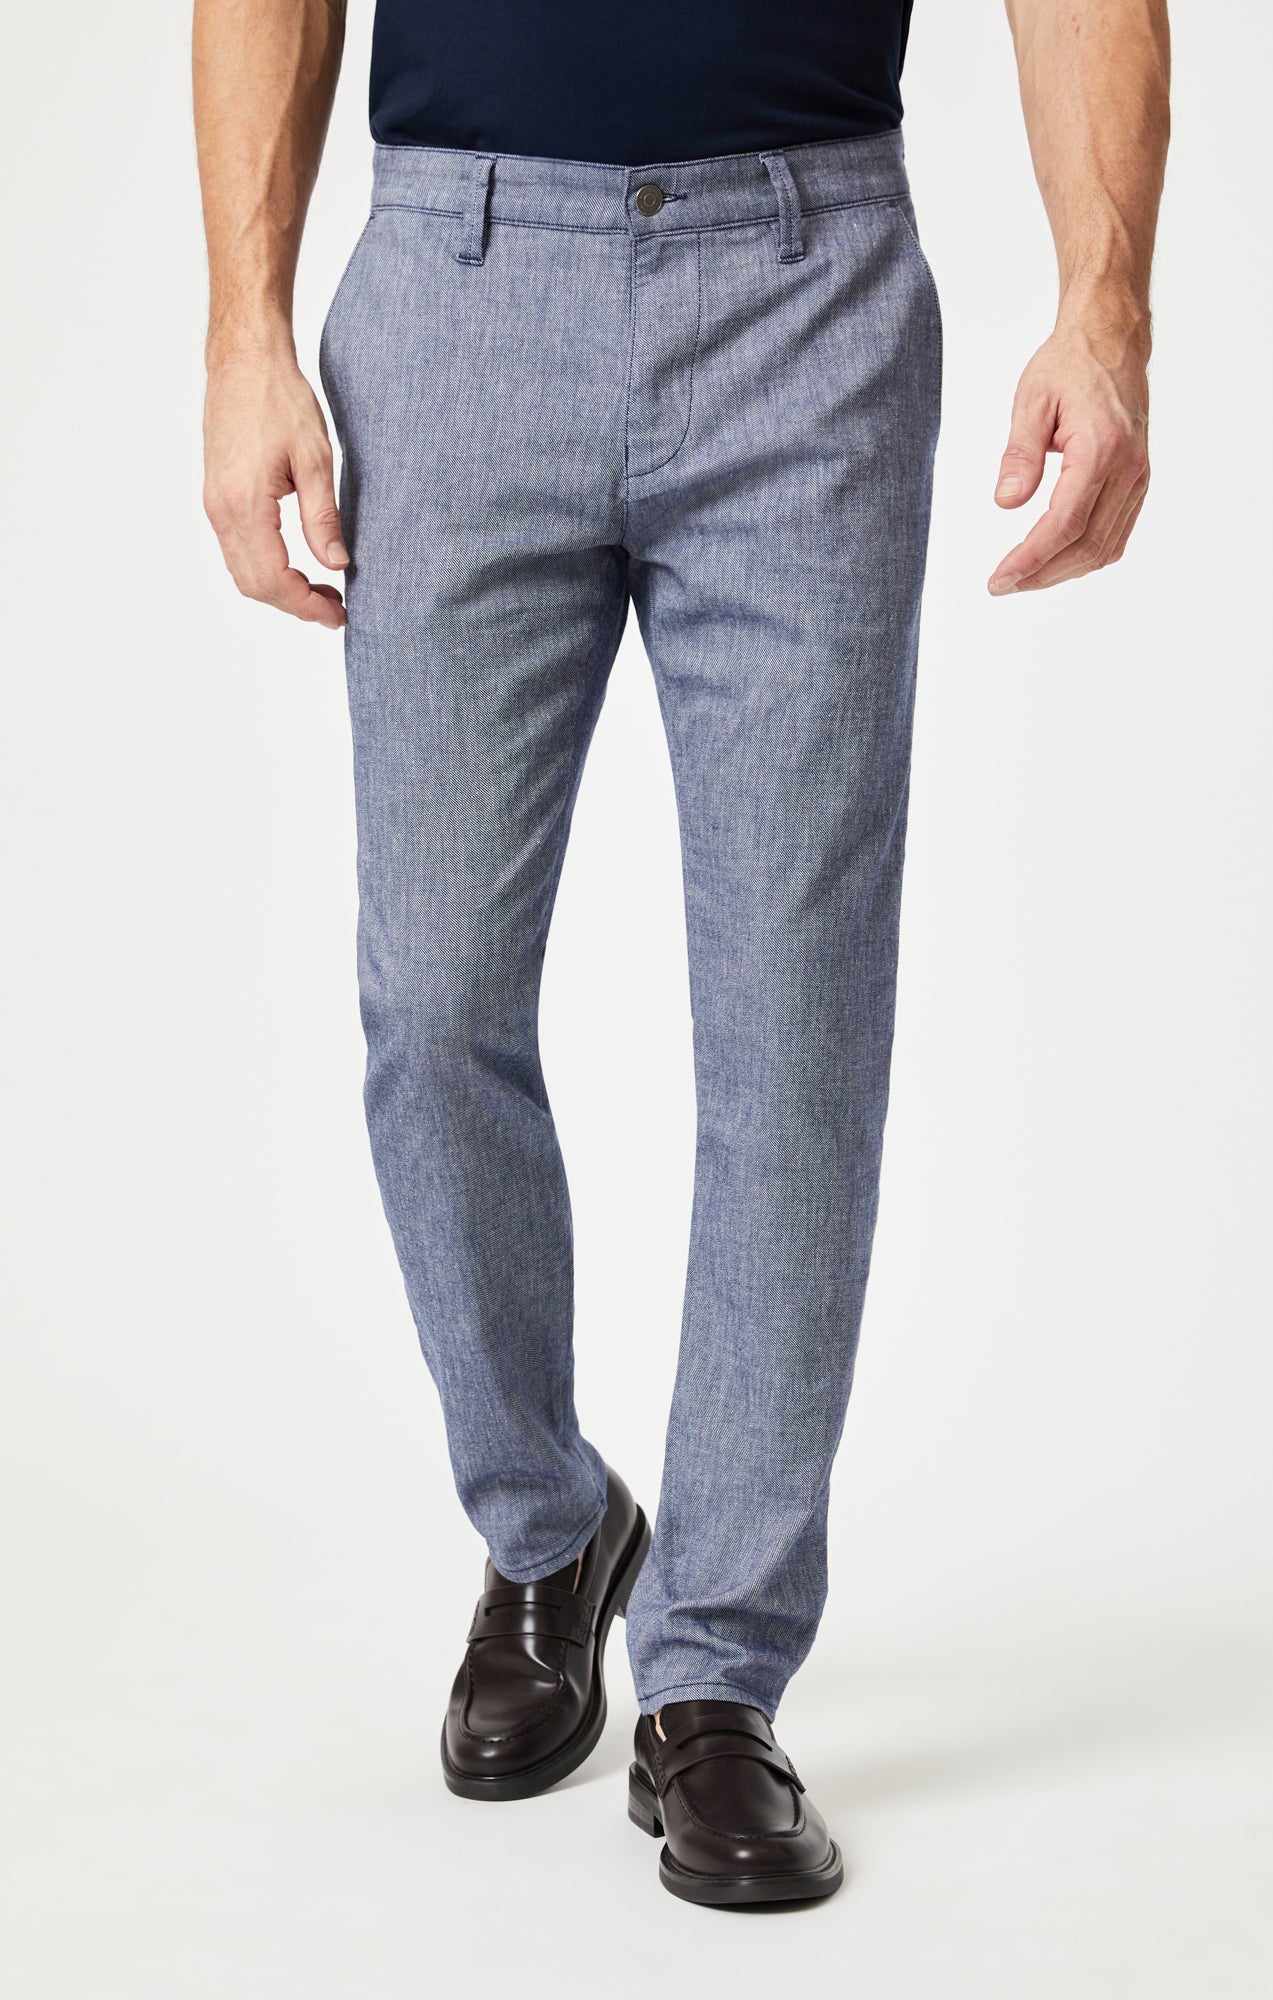 Chinos for Men, Mens Chinos